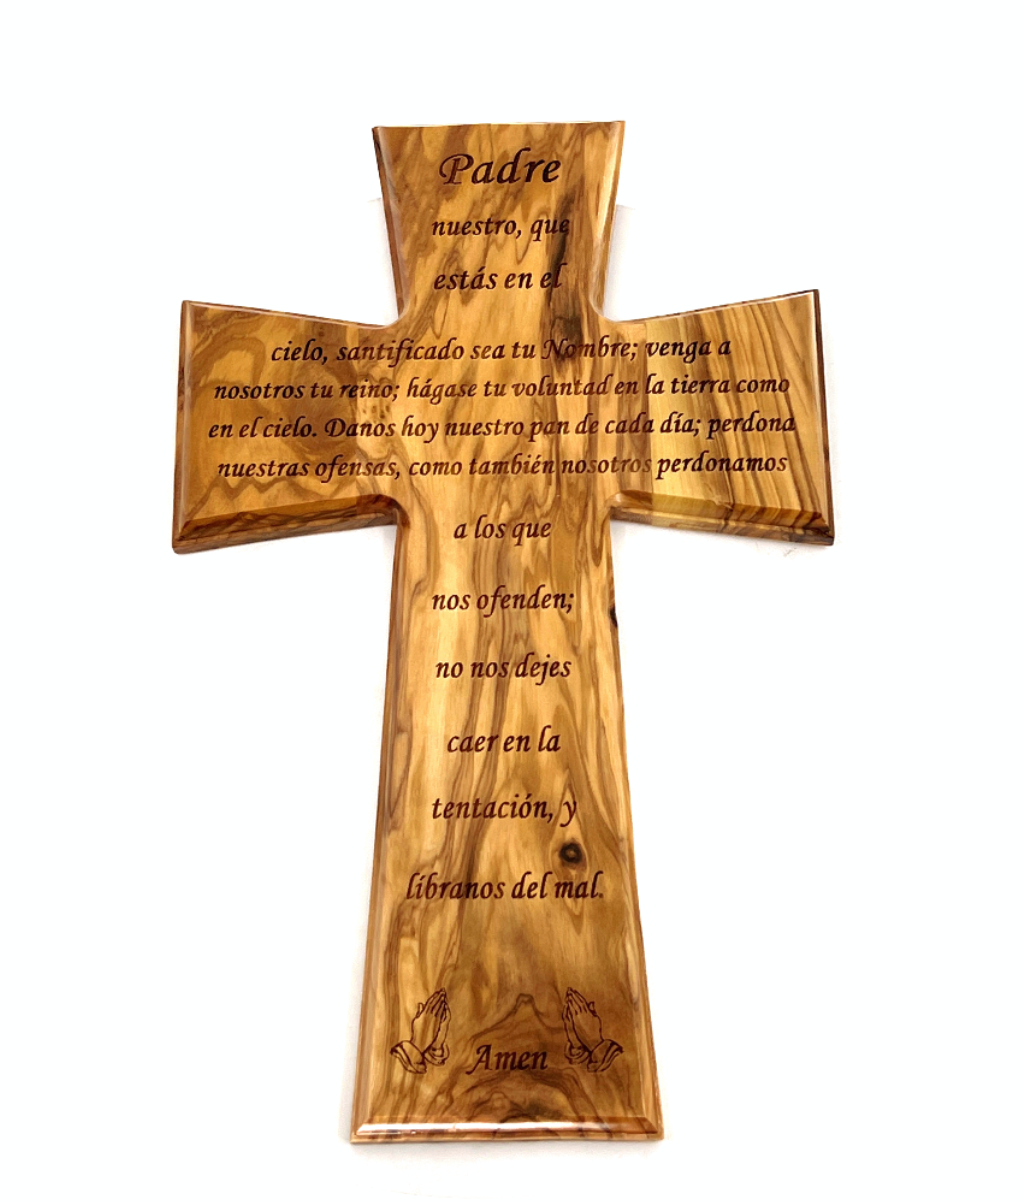 Lord's Prayer Engraved in Spanish Wall Cross, Hand Made with Our Father en el Espanol, Hanging Rosary with Jesus Christ